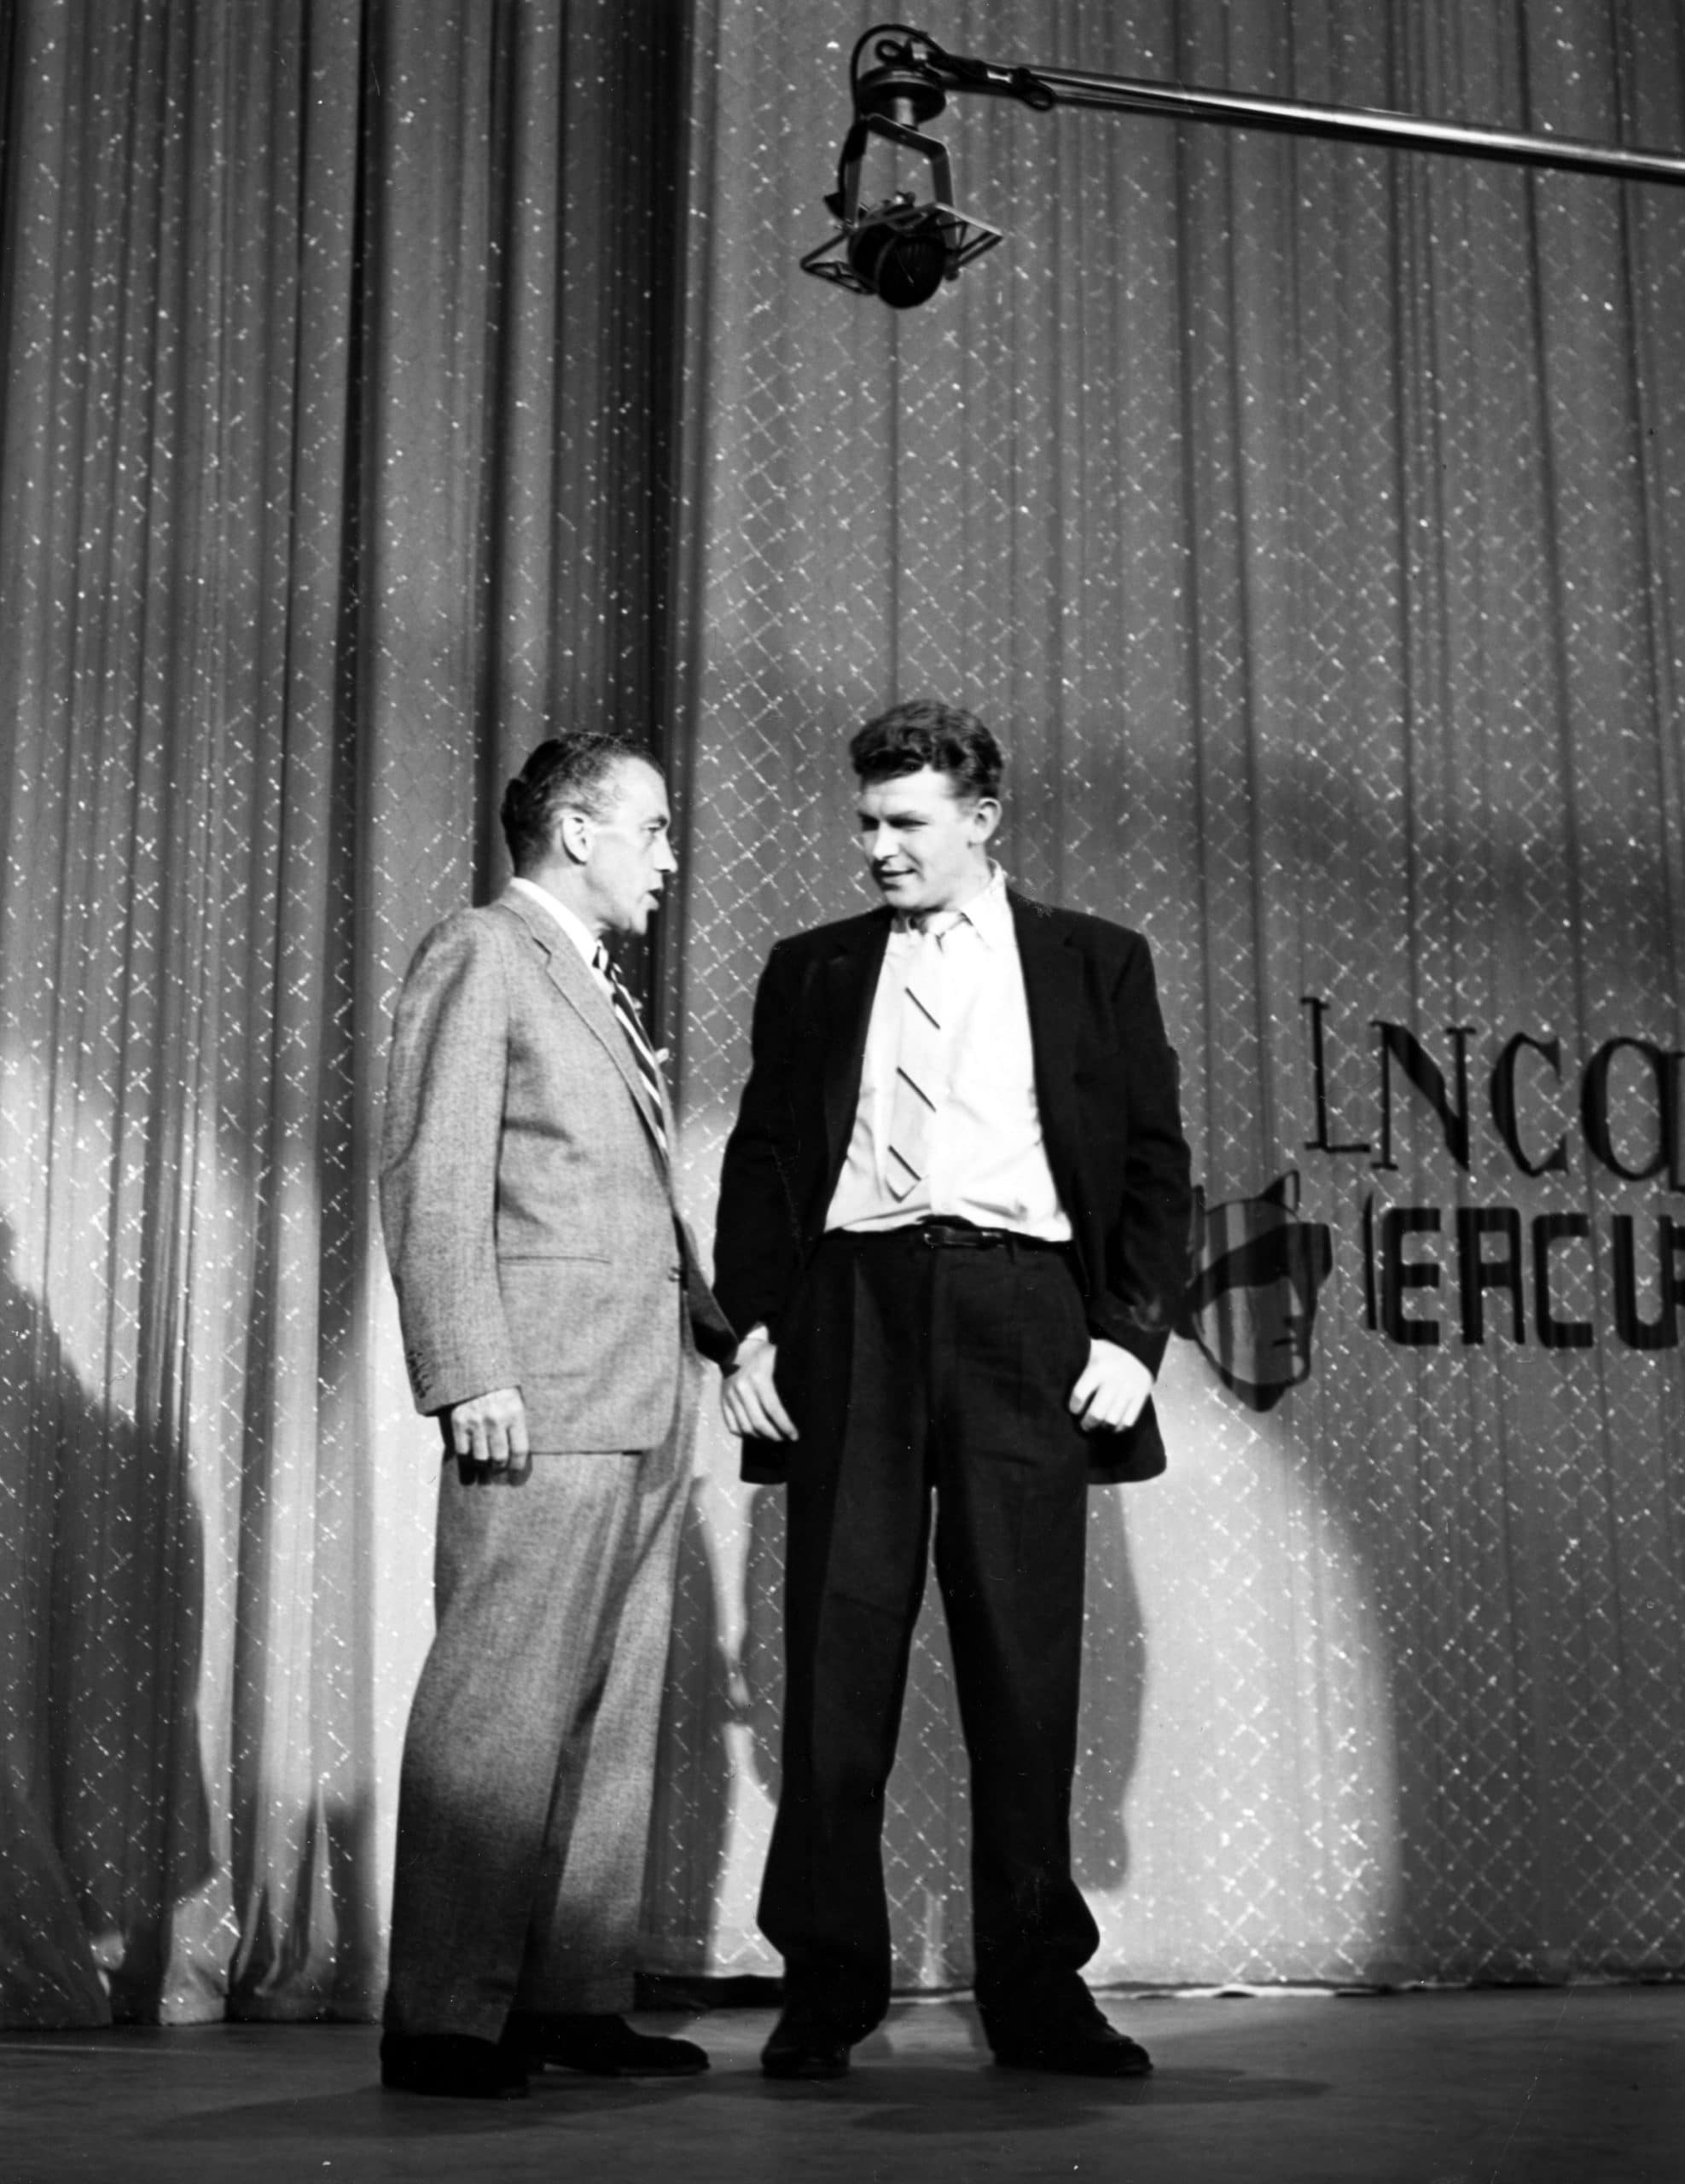 THE ED SULLIVAN SHOW, (aka TOAST OF THE TOWN), from left: Ed Sullivan, Andy Griffith